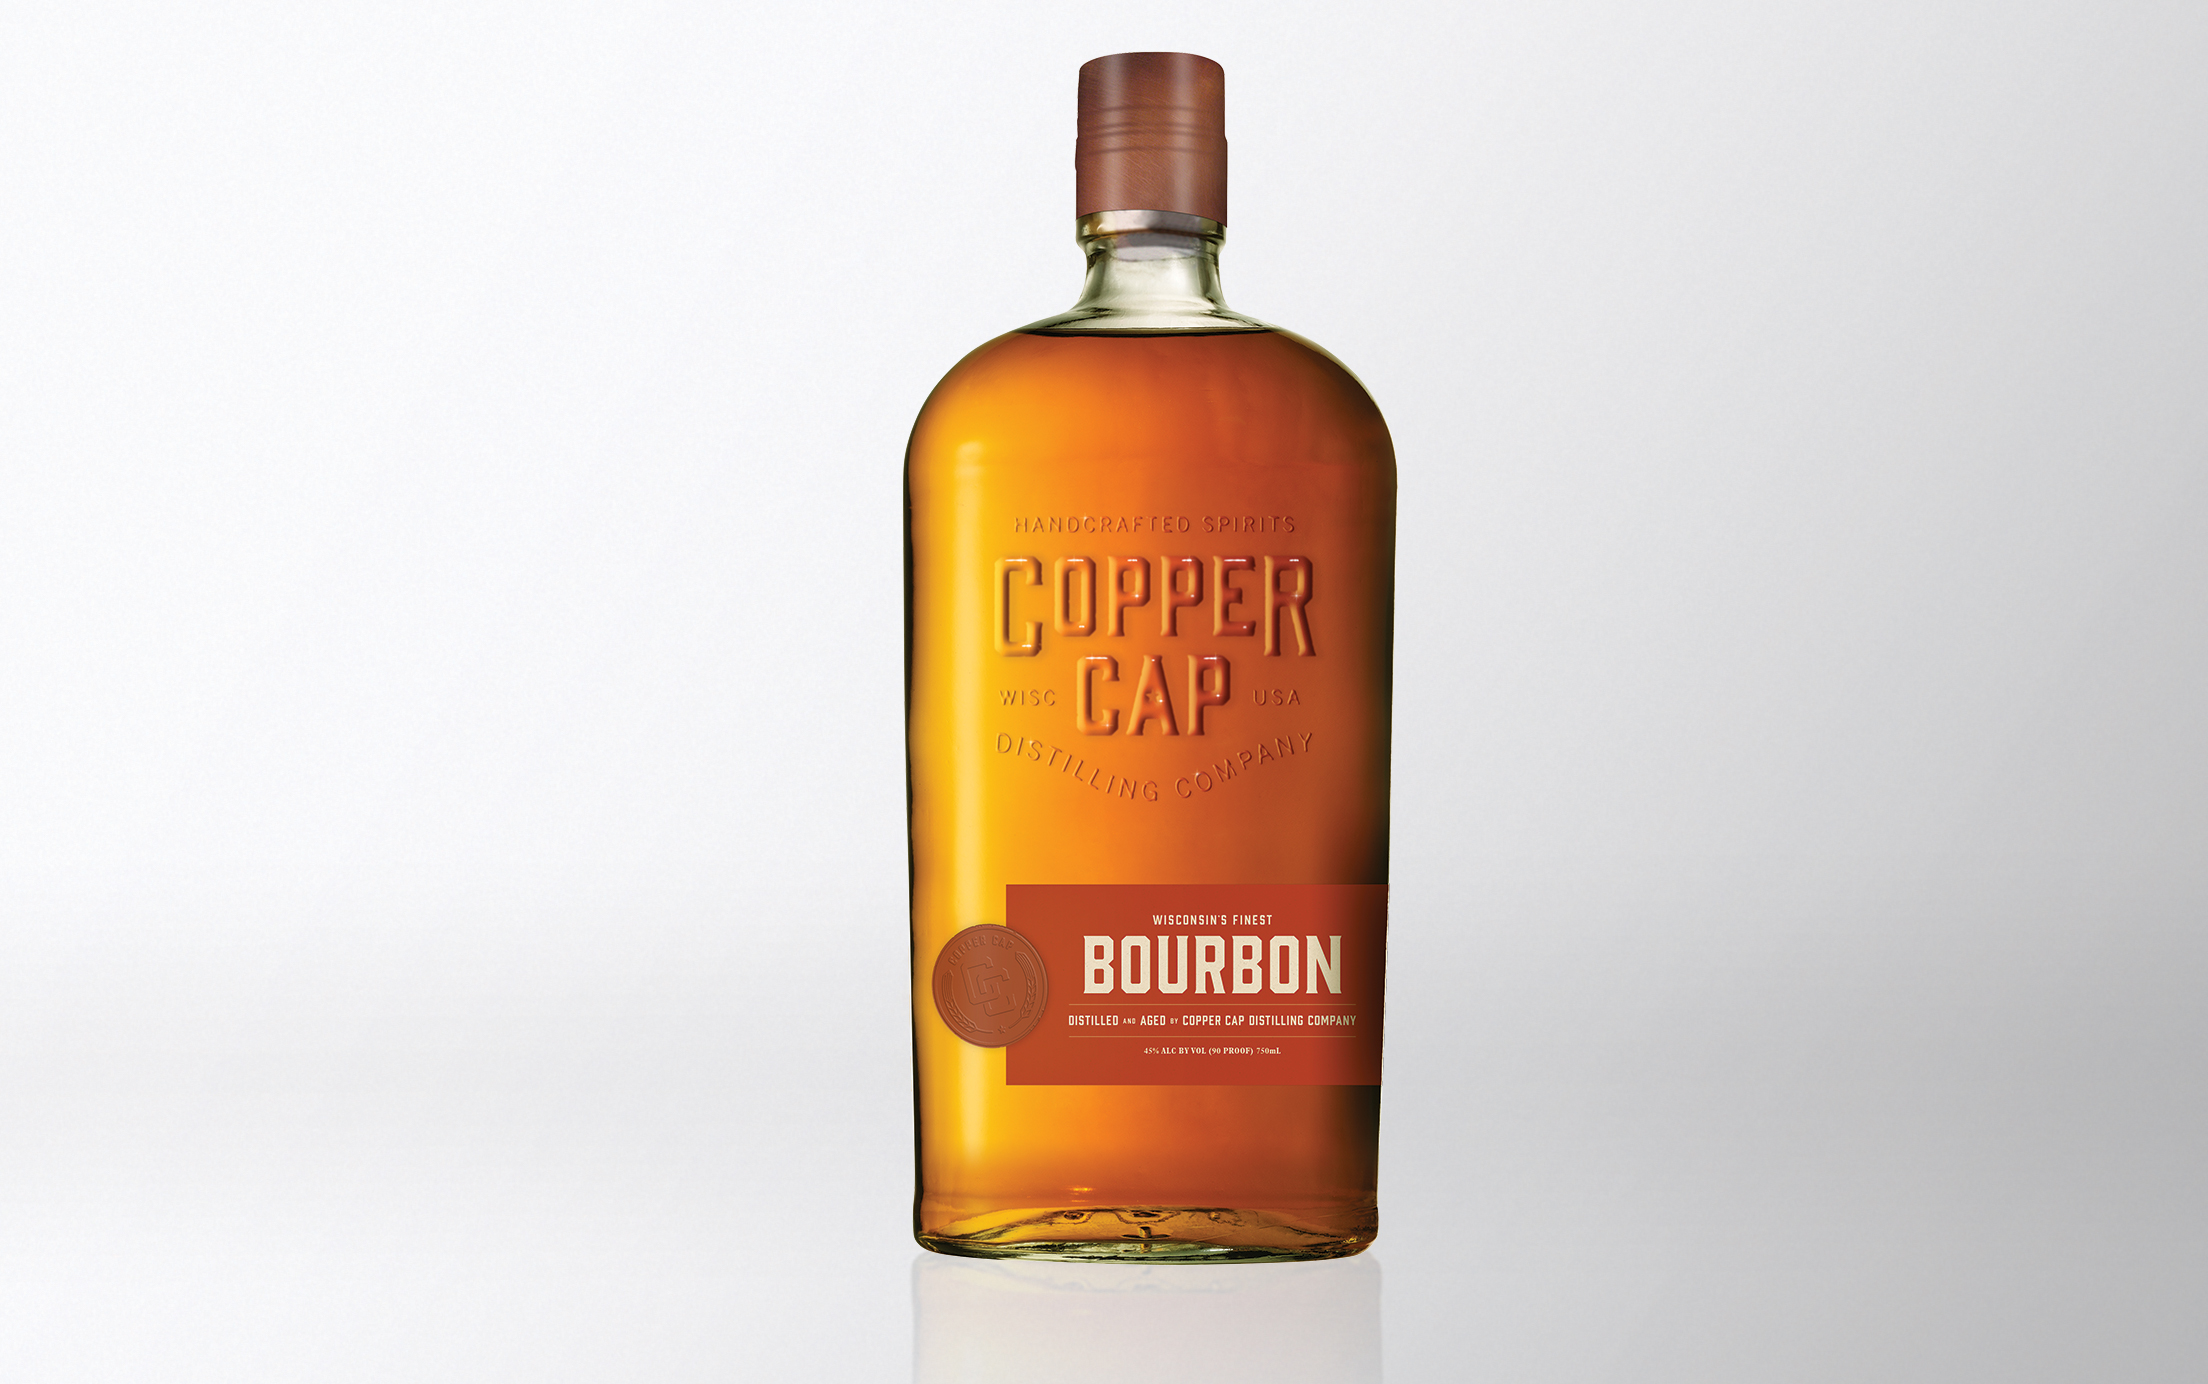 Packaging for Copper Cap Distilling Company